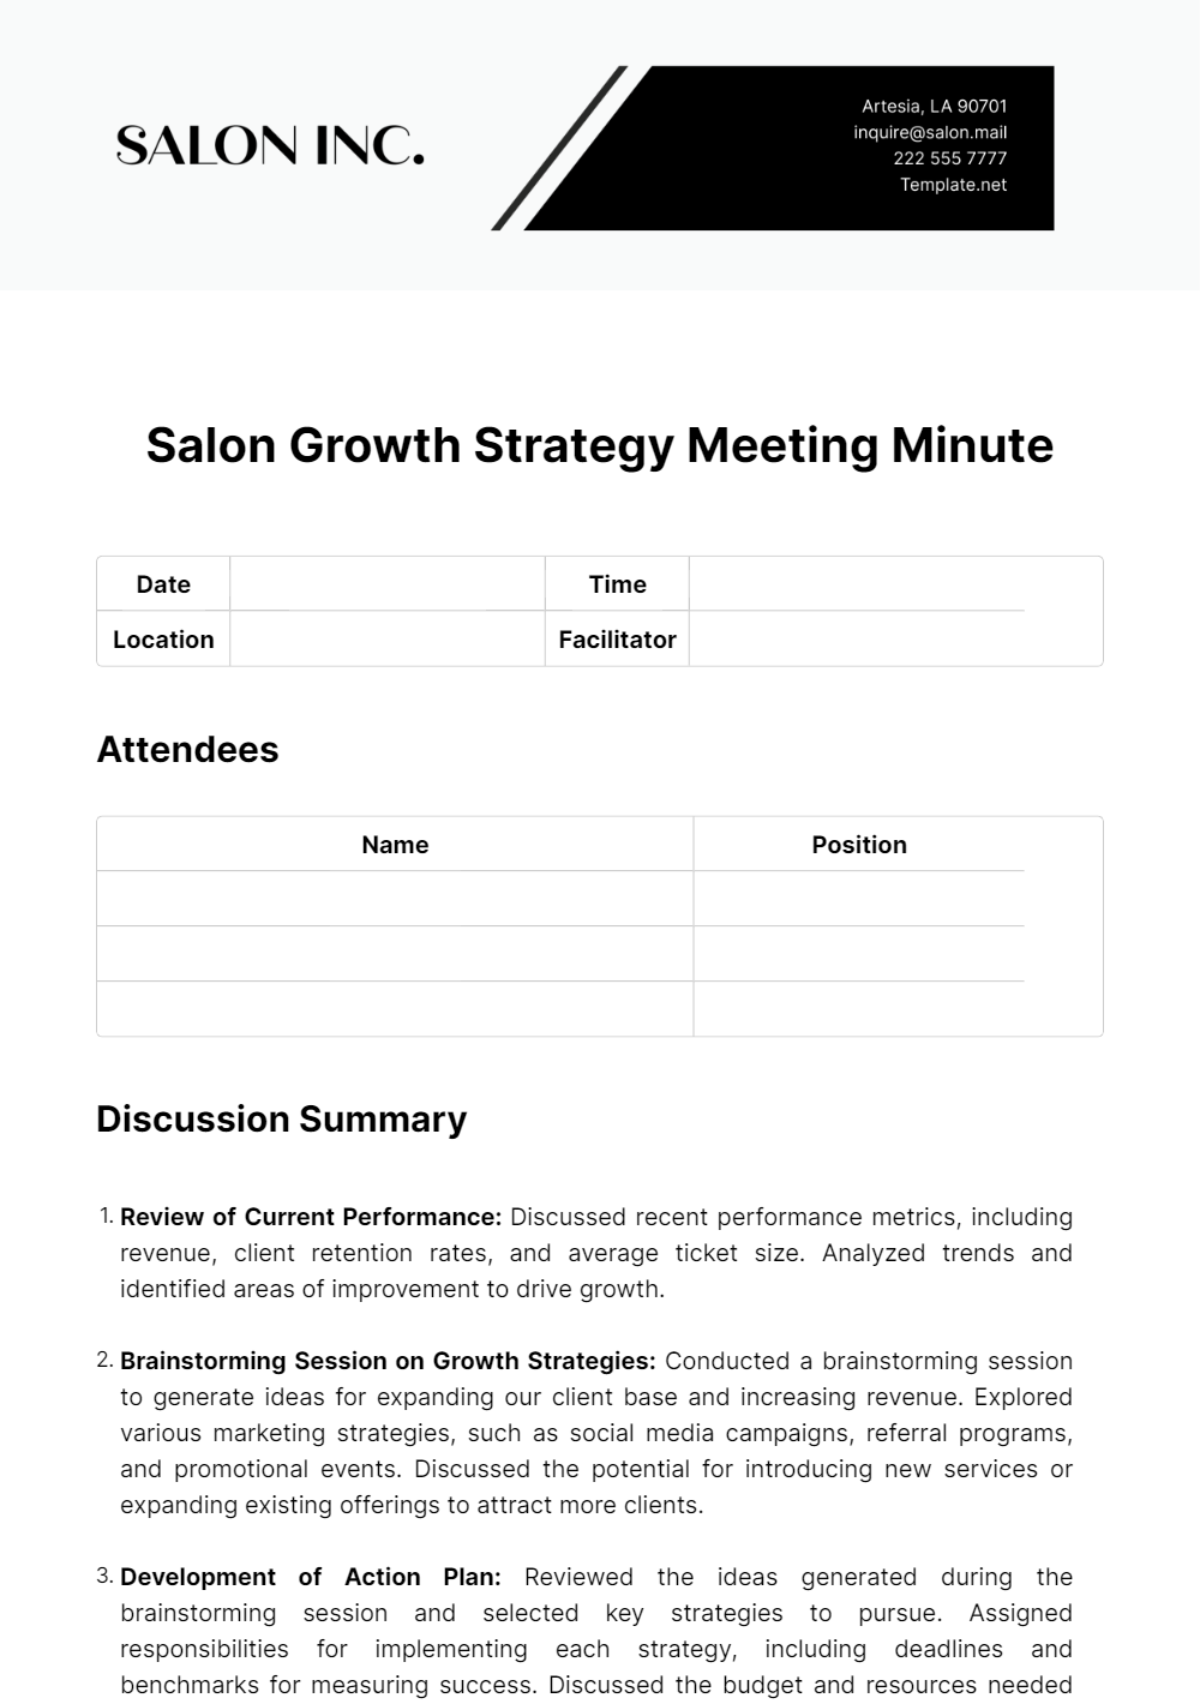 Salon Growth Strategy Meeting Minute Template